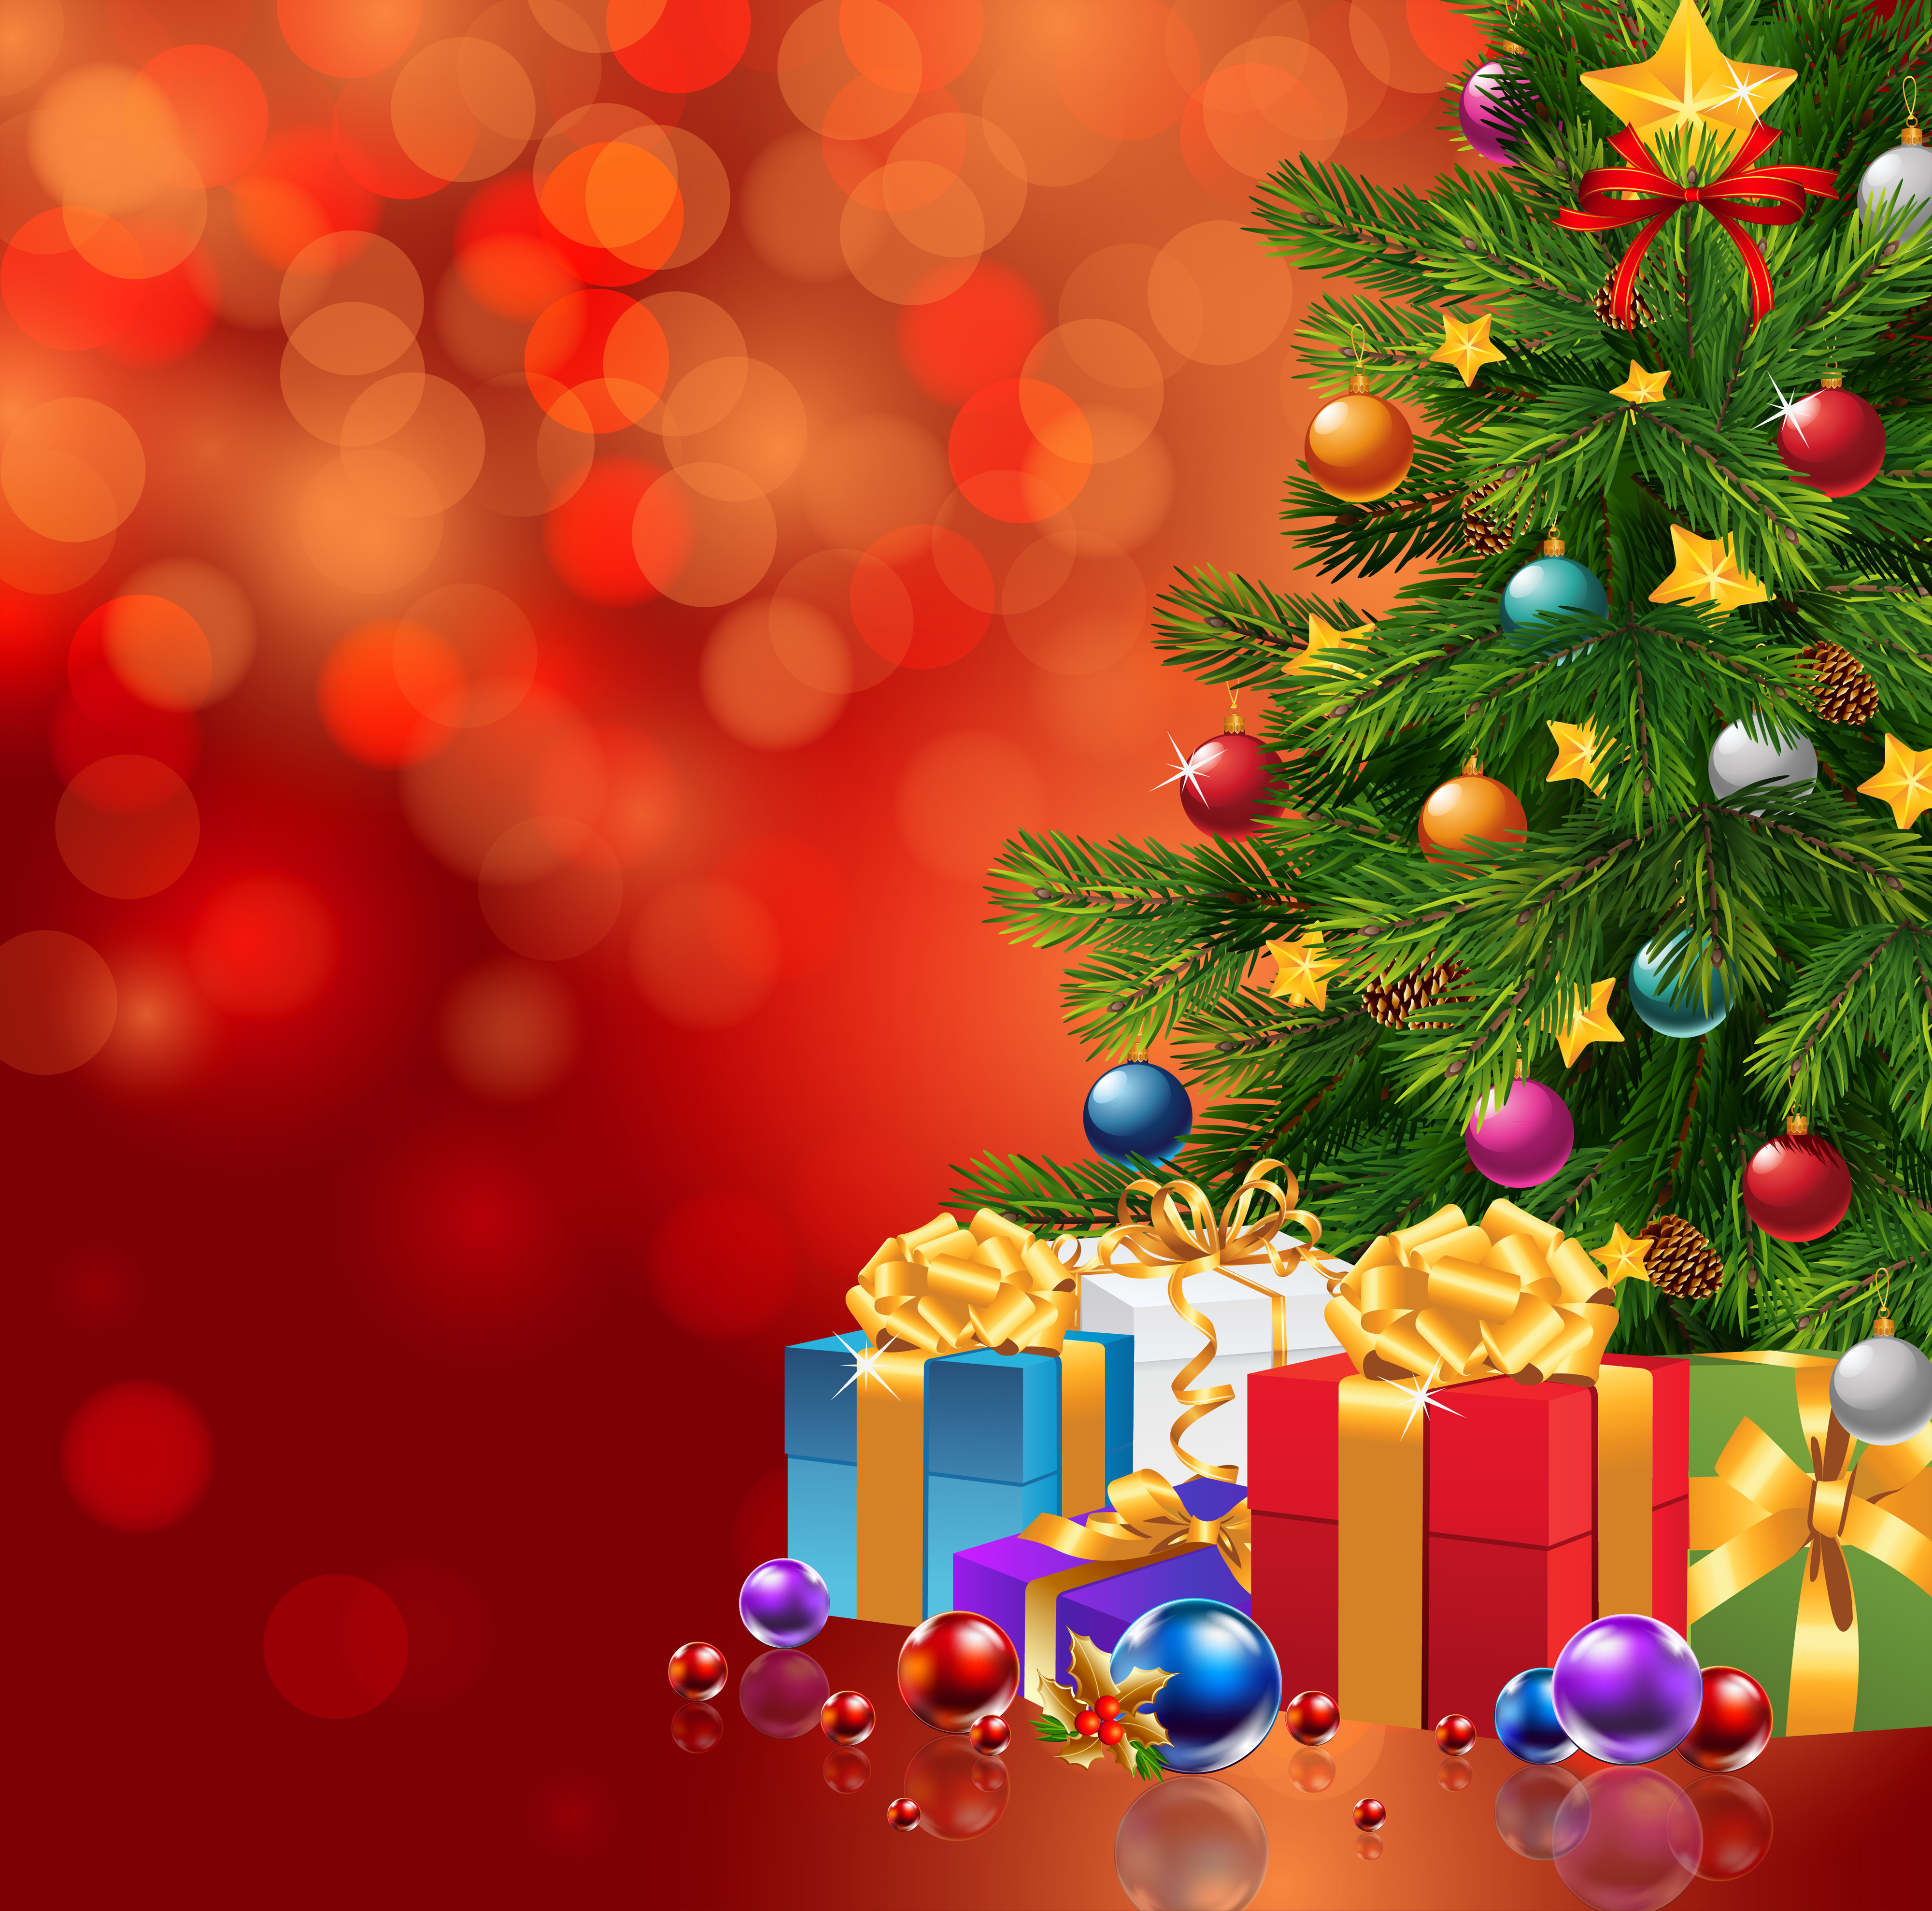 Red Christmas Background With Xmas Tree And Gifts Gallery